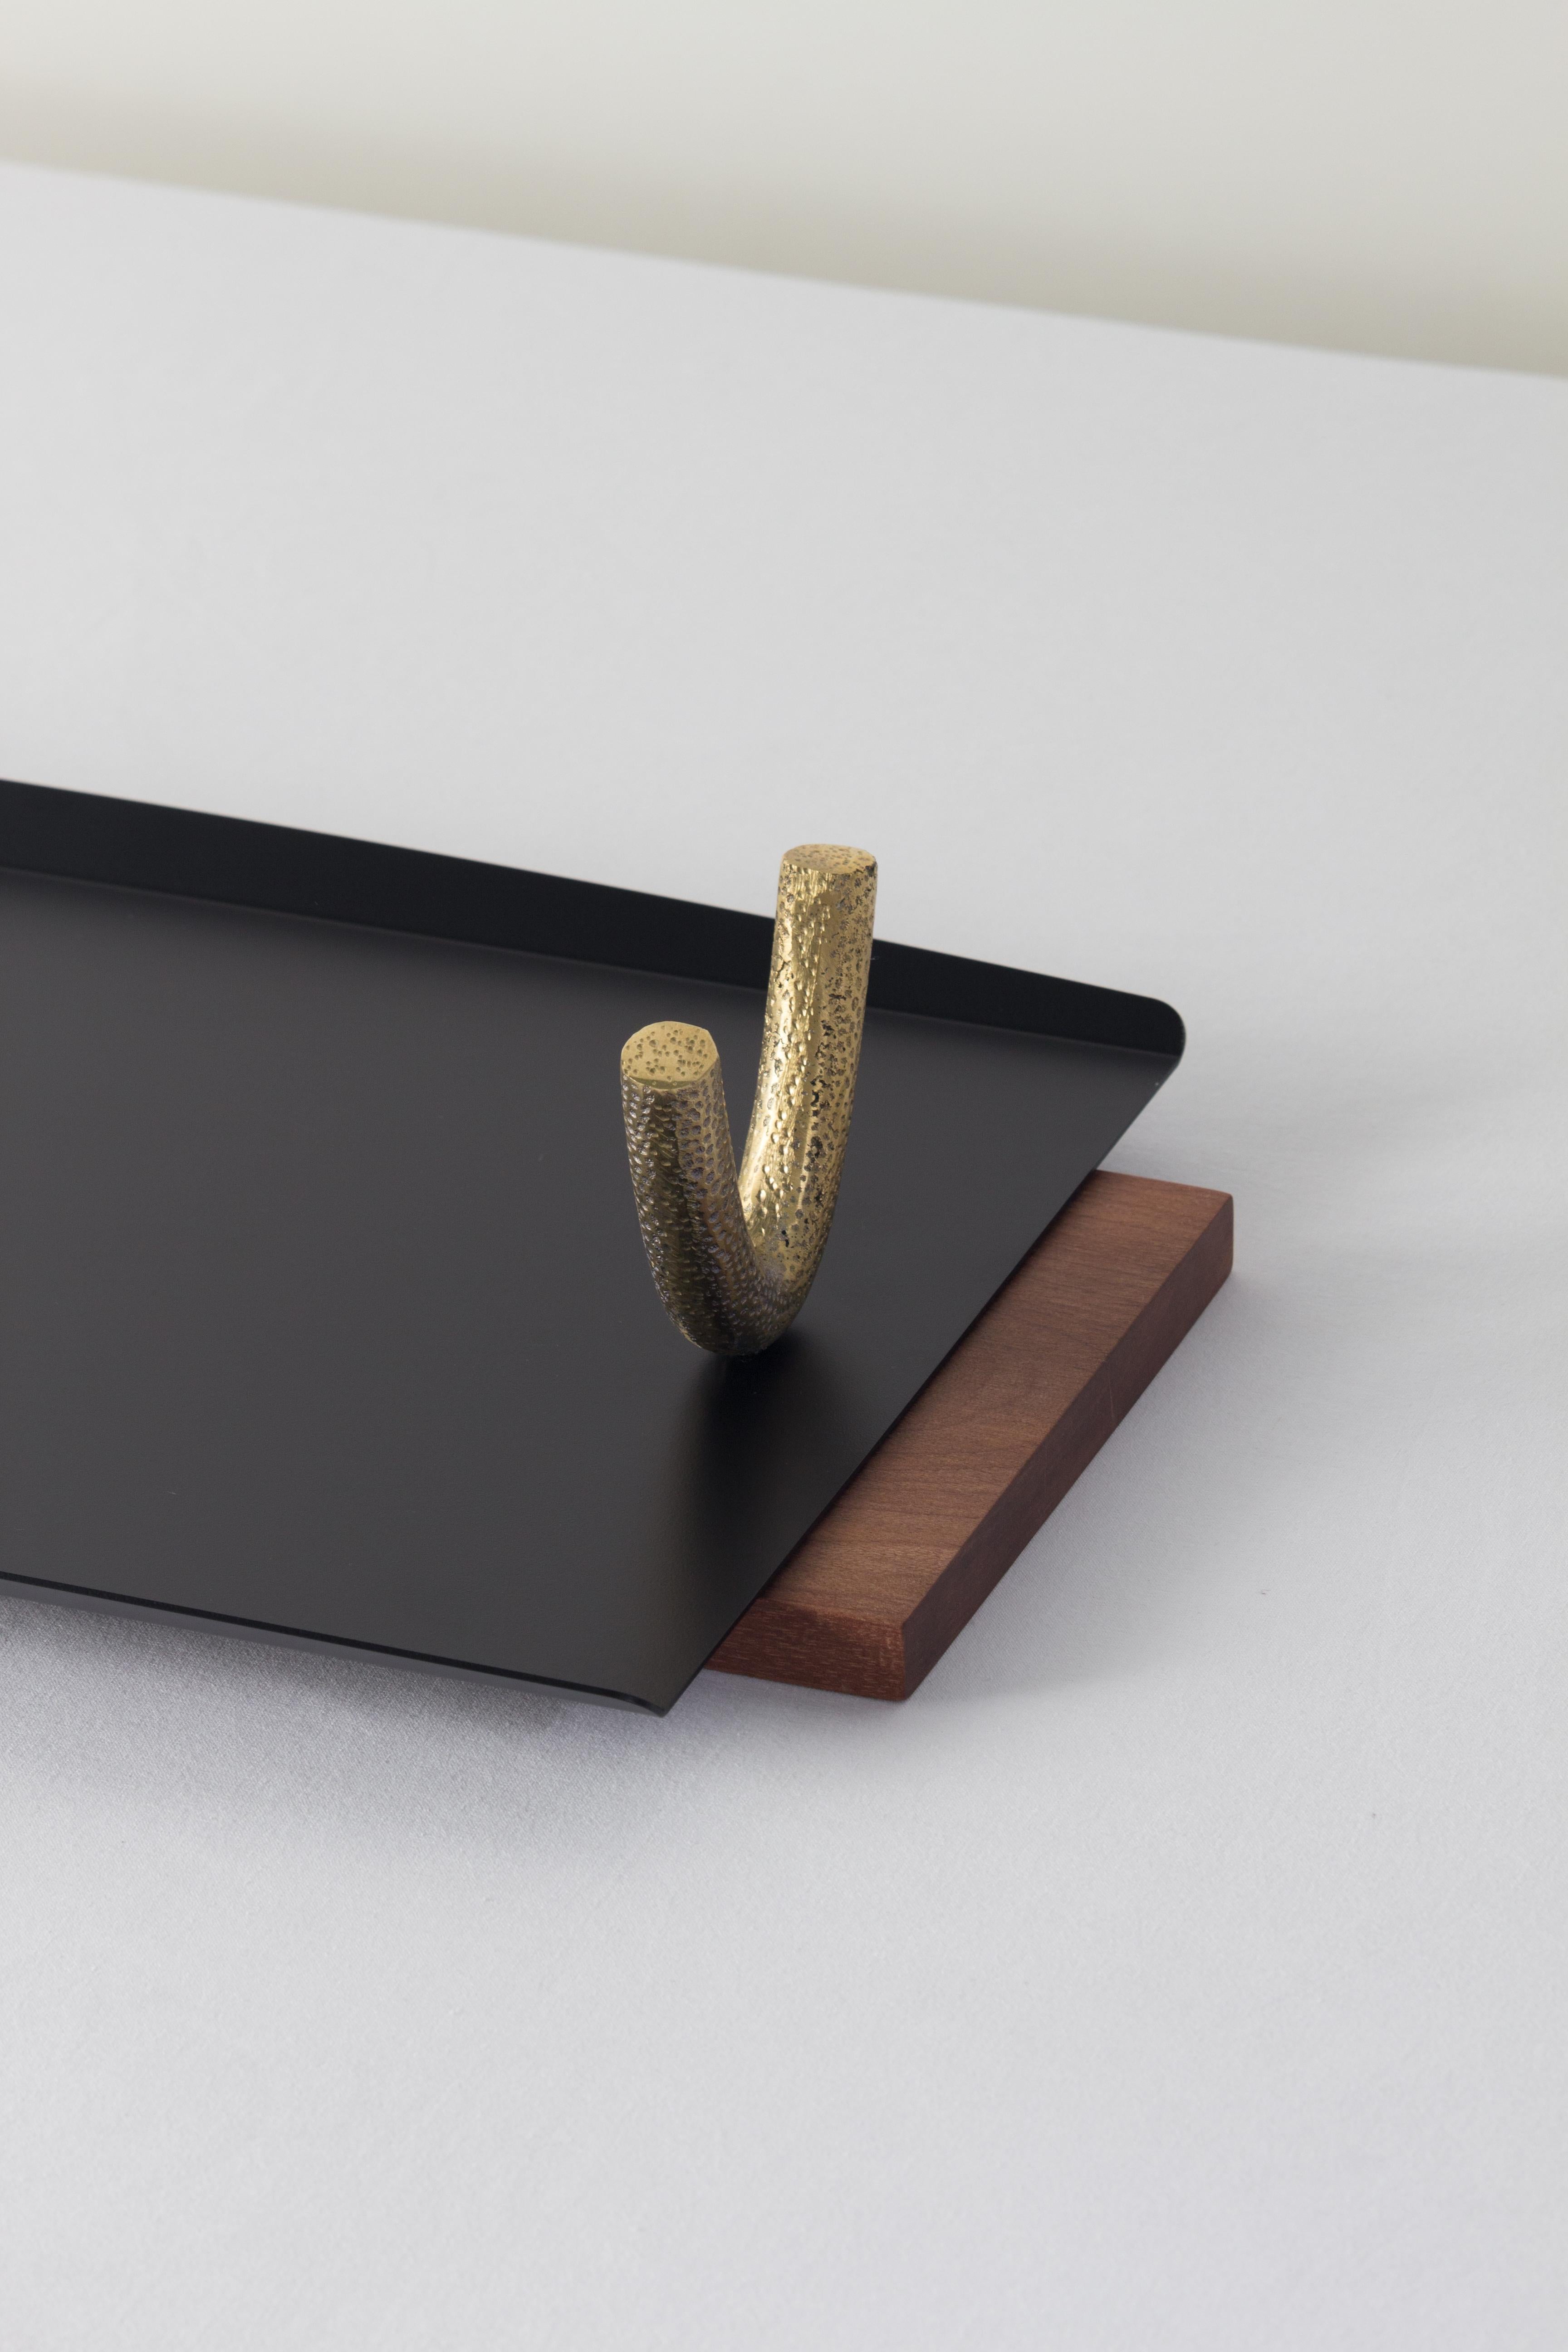 Arco Trays (Set of 2) with cast brass handles by Estúdio Dentro In New Condition For Sale In Belo Horizonte, MG